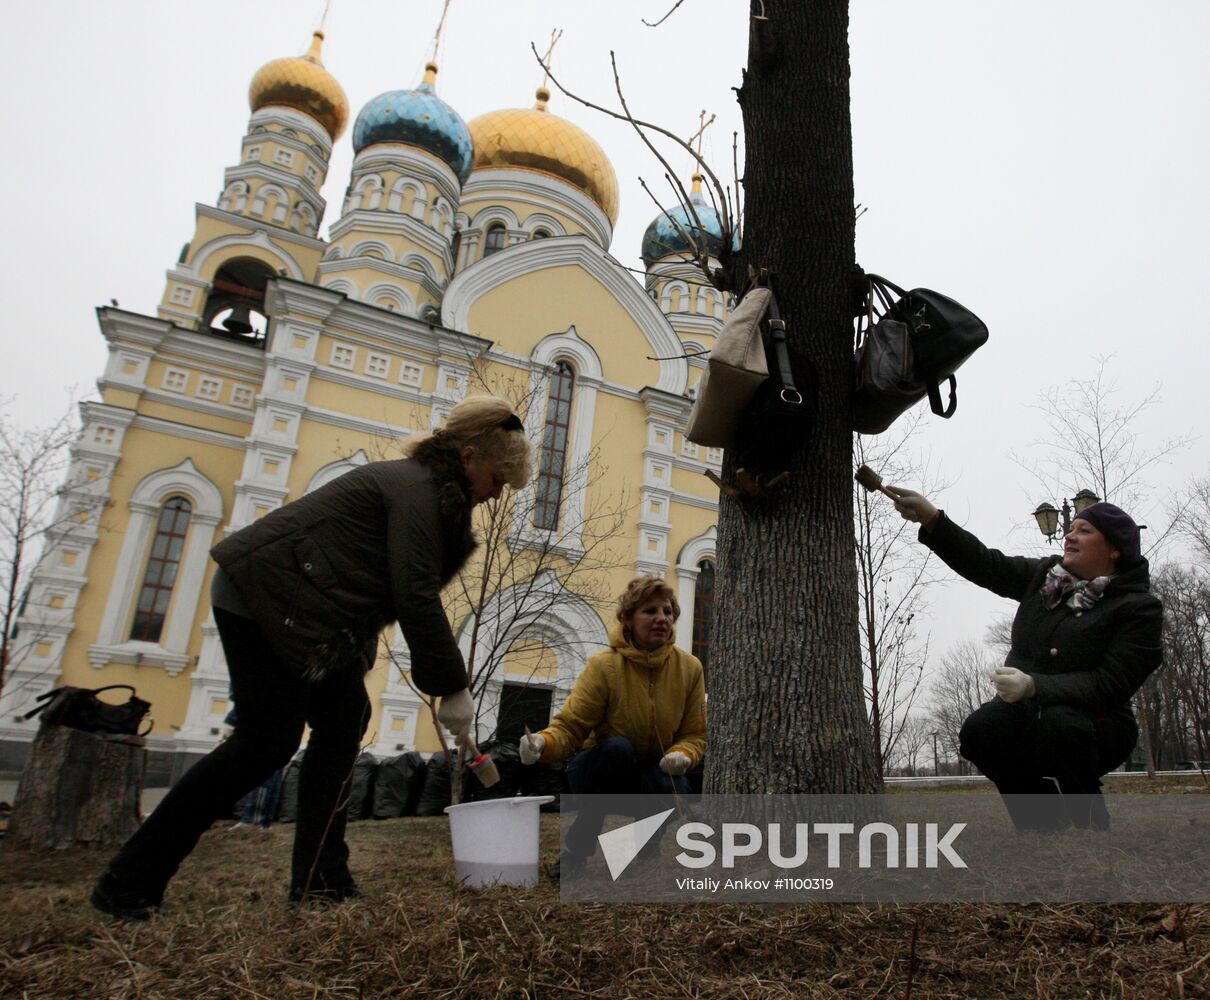 Clean-up days in Russian cities